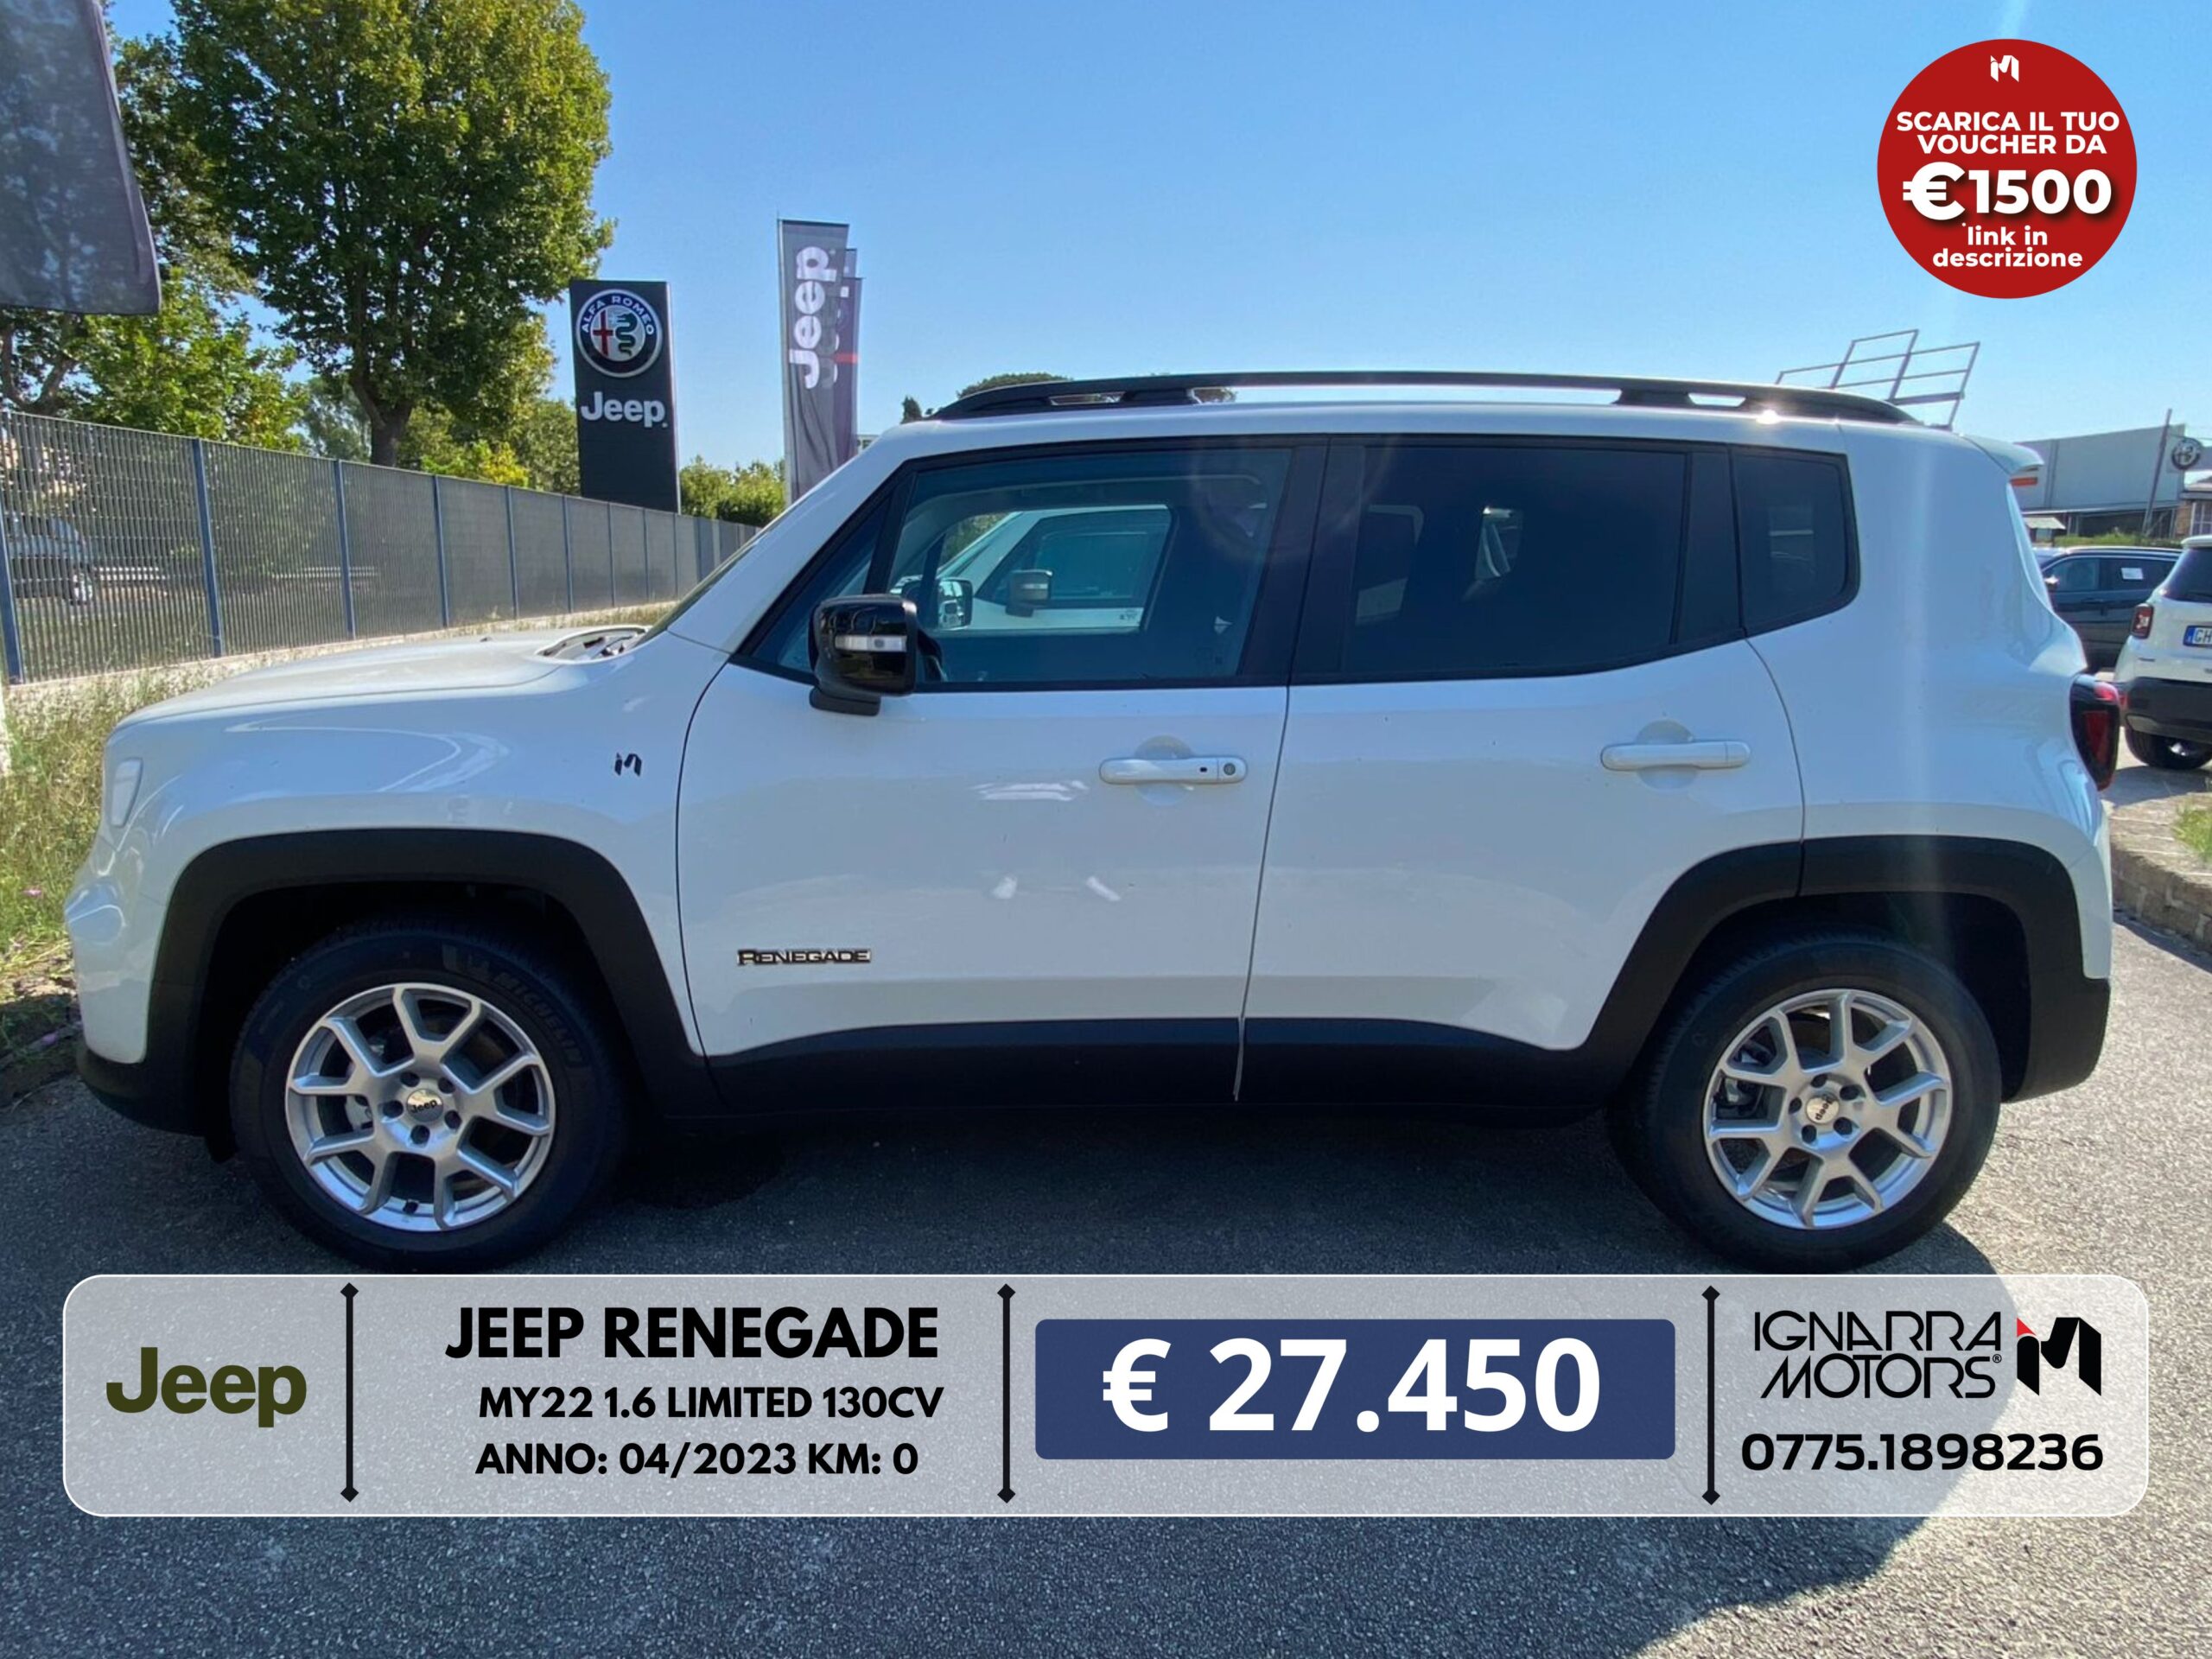 JEEP RENEGADE MY22 1.6 LIMITED 130CV